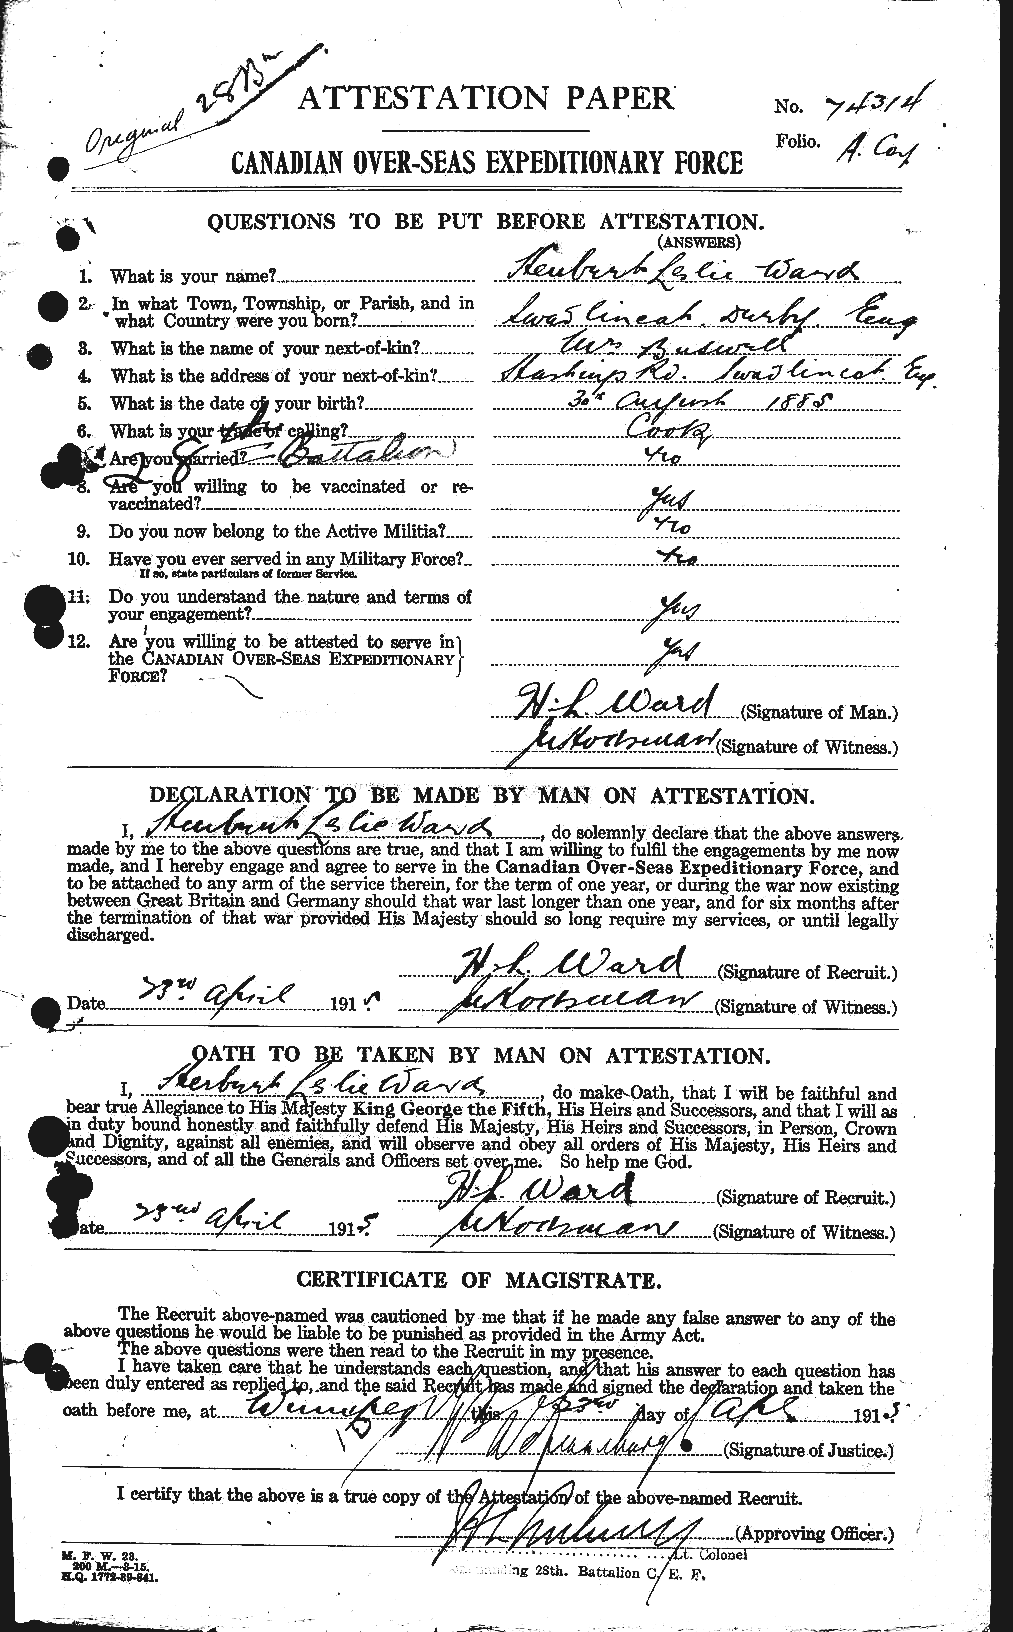 Personnel Records of the First World War - CEF 657855a